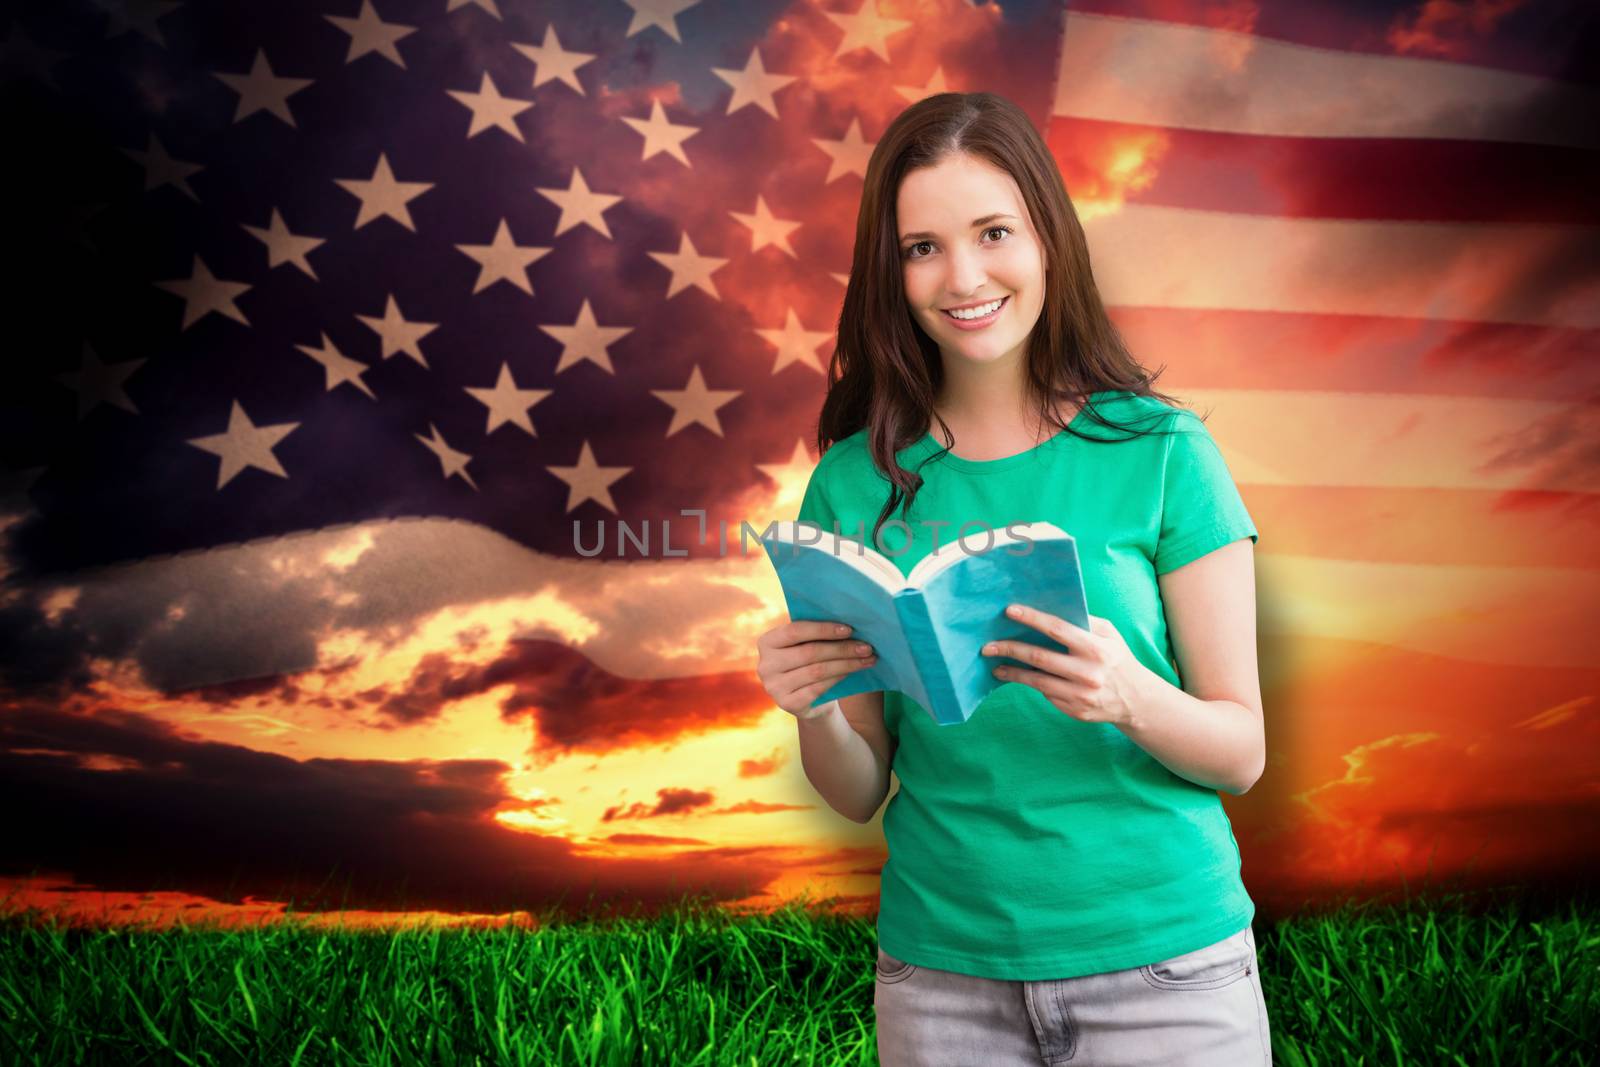 Student picking a book from shelf in library against composite image of united states of america flag